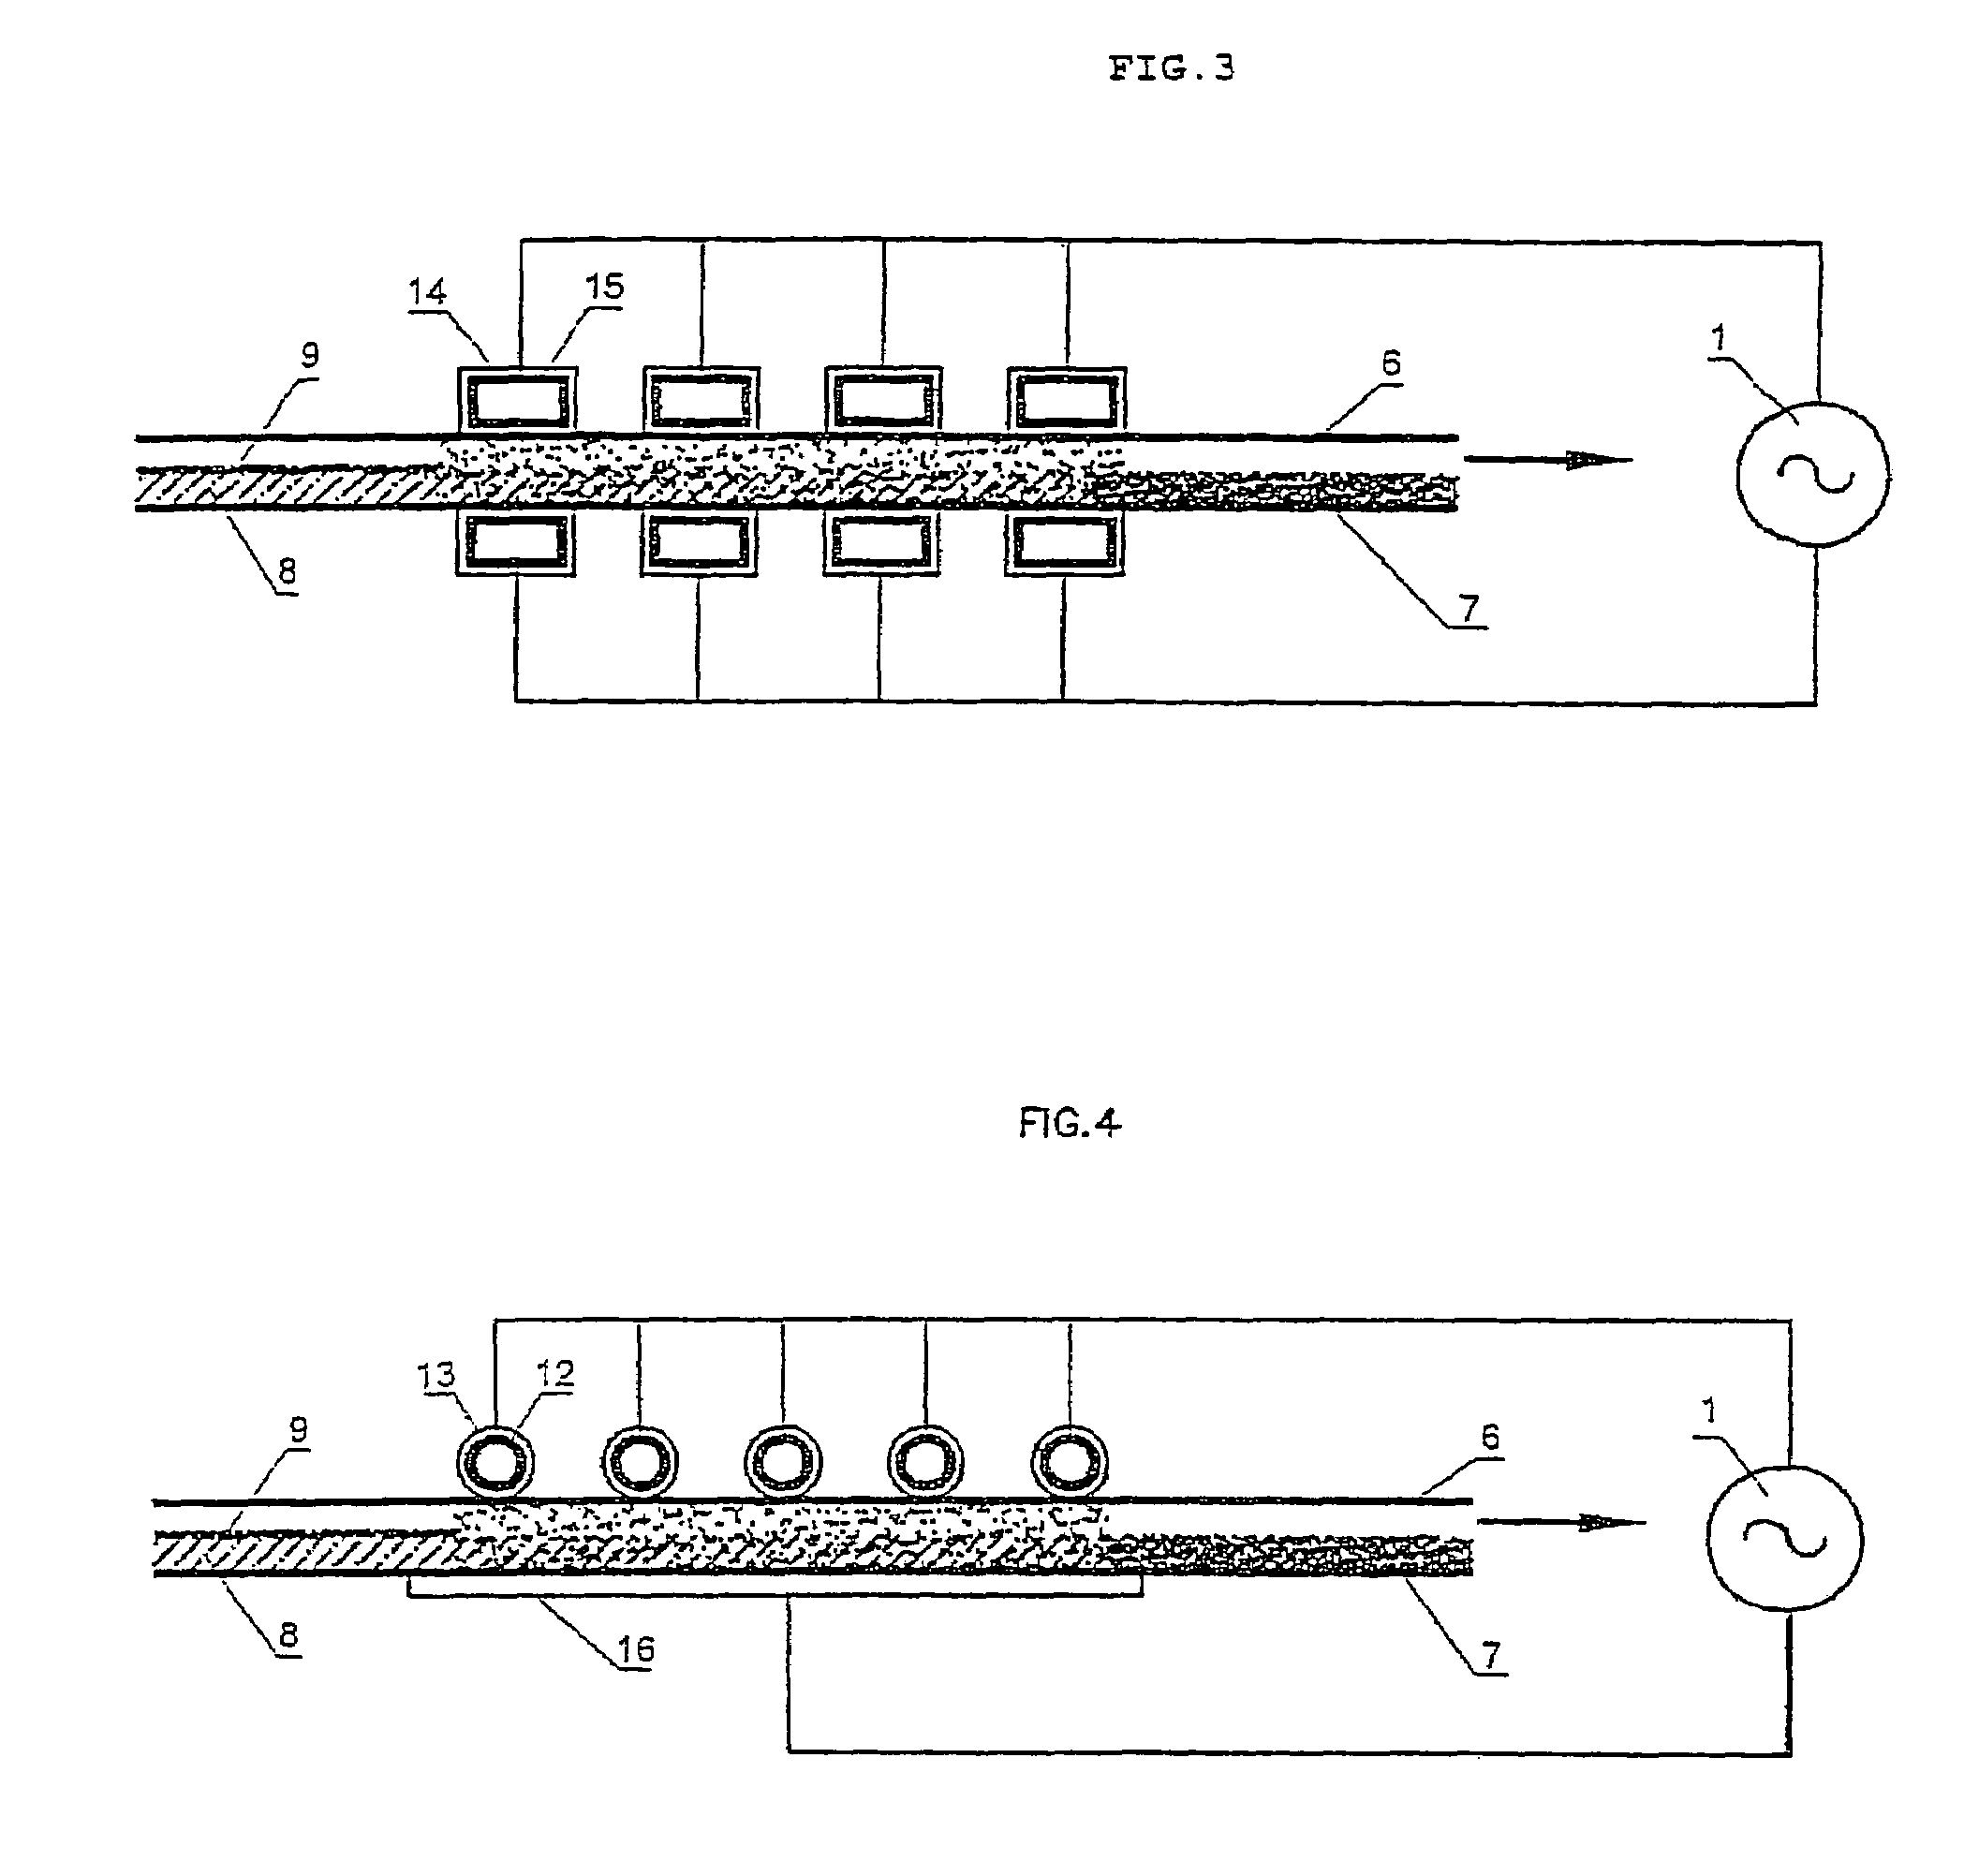 Process for impregnating a fibrous, filamentary and/or porous network with powder using electrodes subjected to an AC electric field